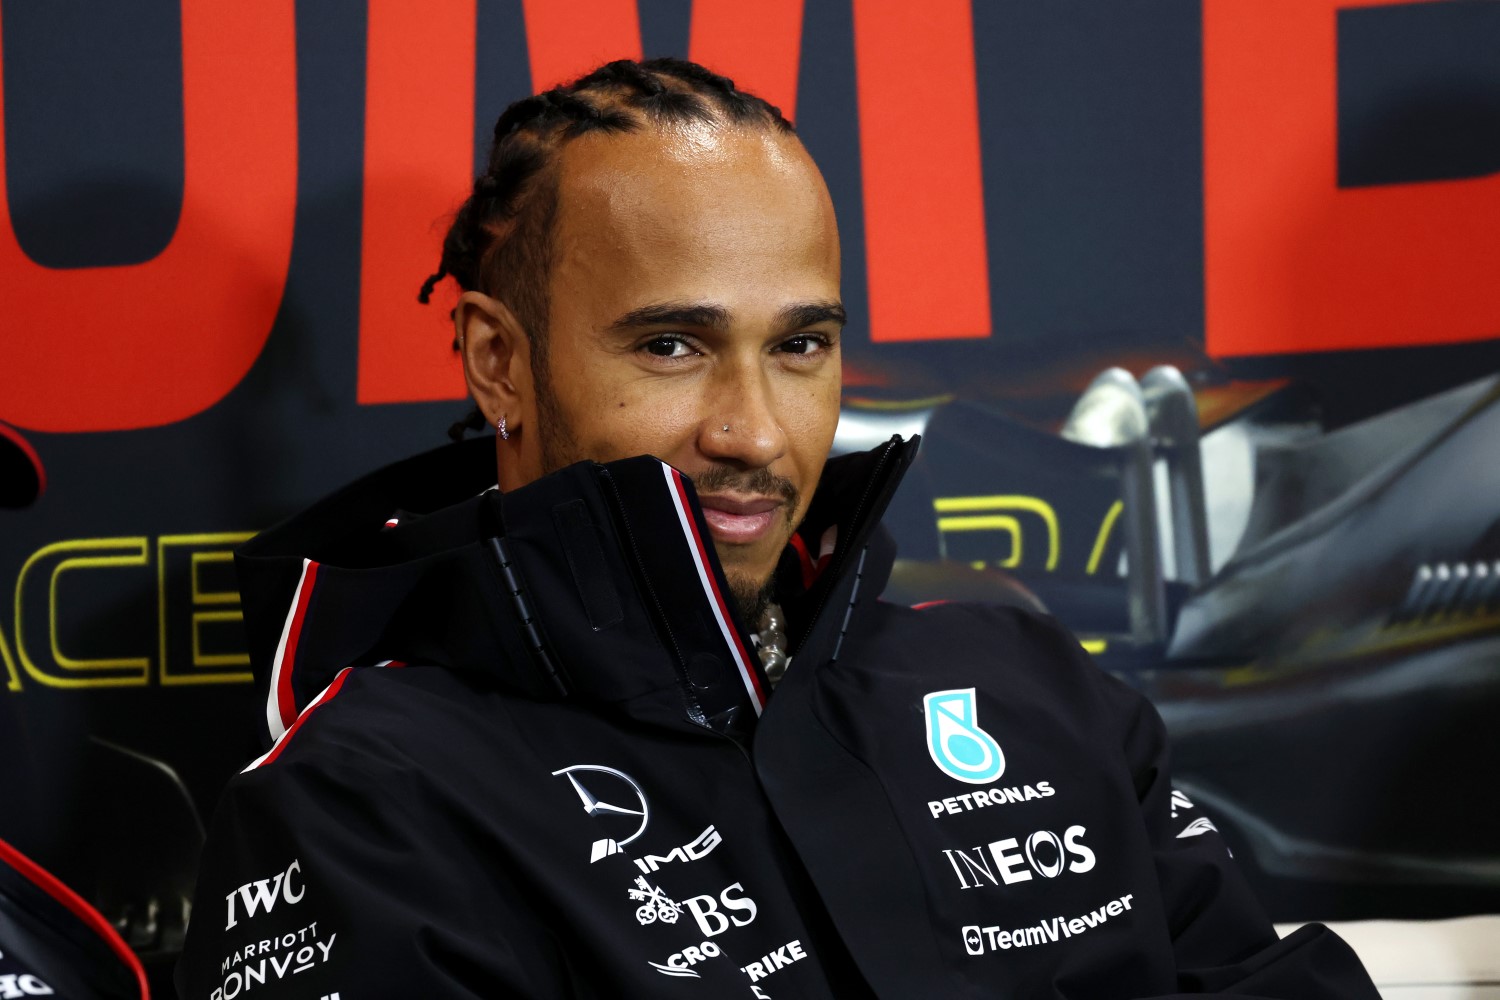 A smug Lewis Hamilton 2023 Belgian Grand Prix - LAT Images for Mercedes. Every time he is next to a Red Bull, be it Perez or Verstappen, he hits them.